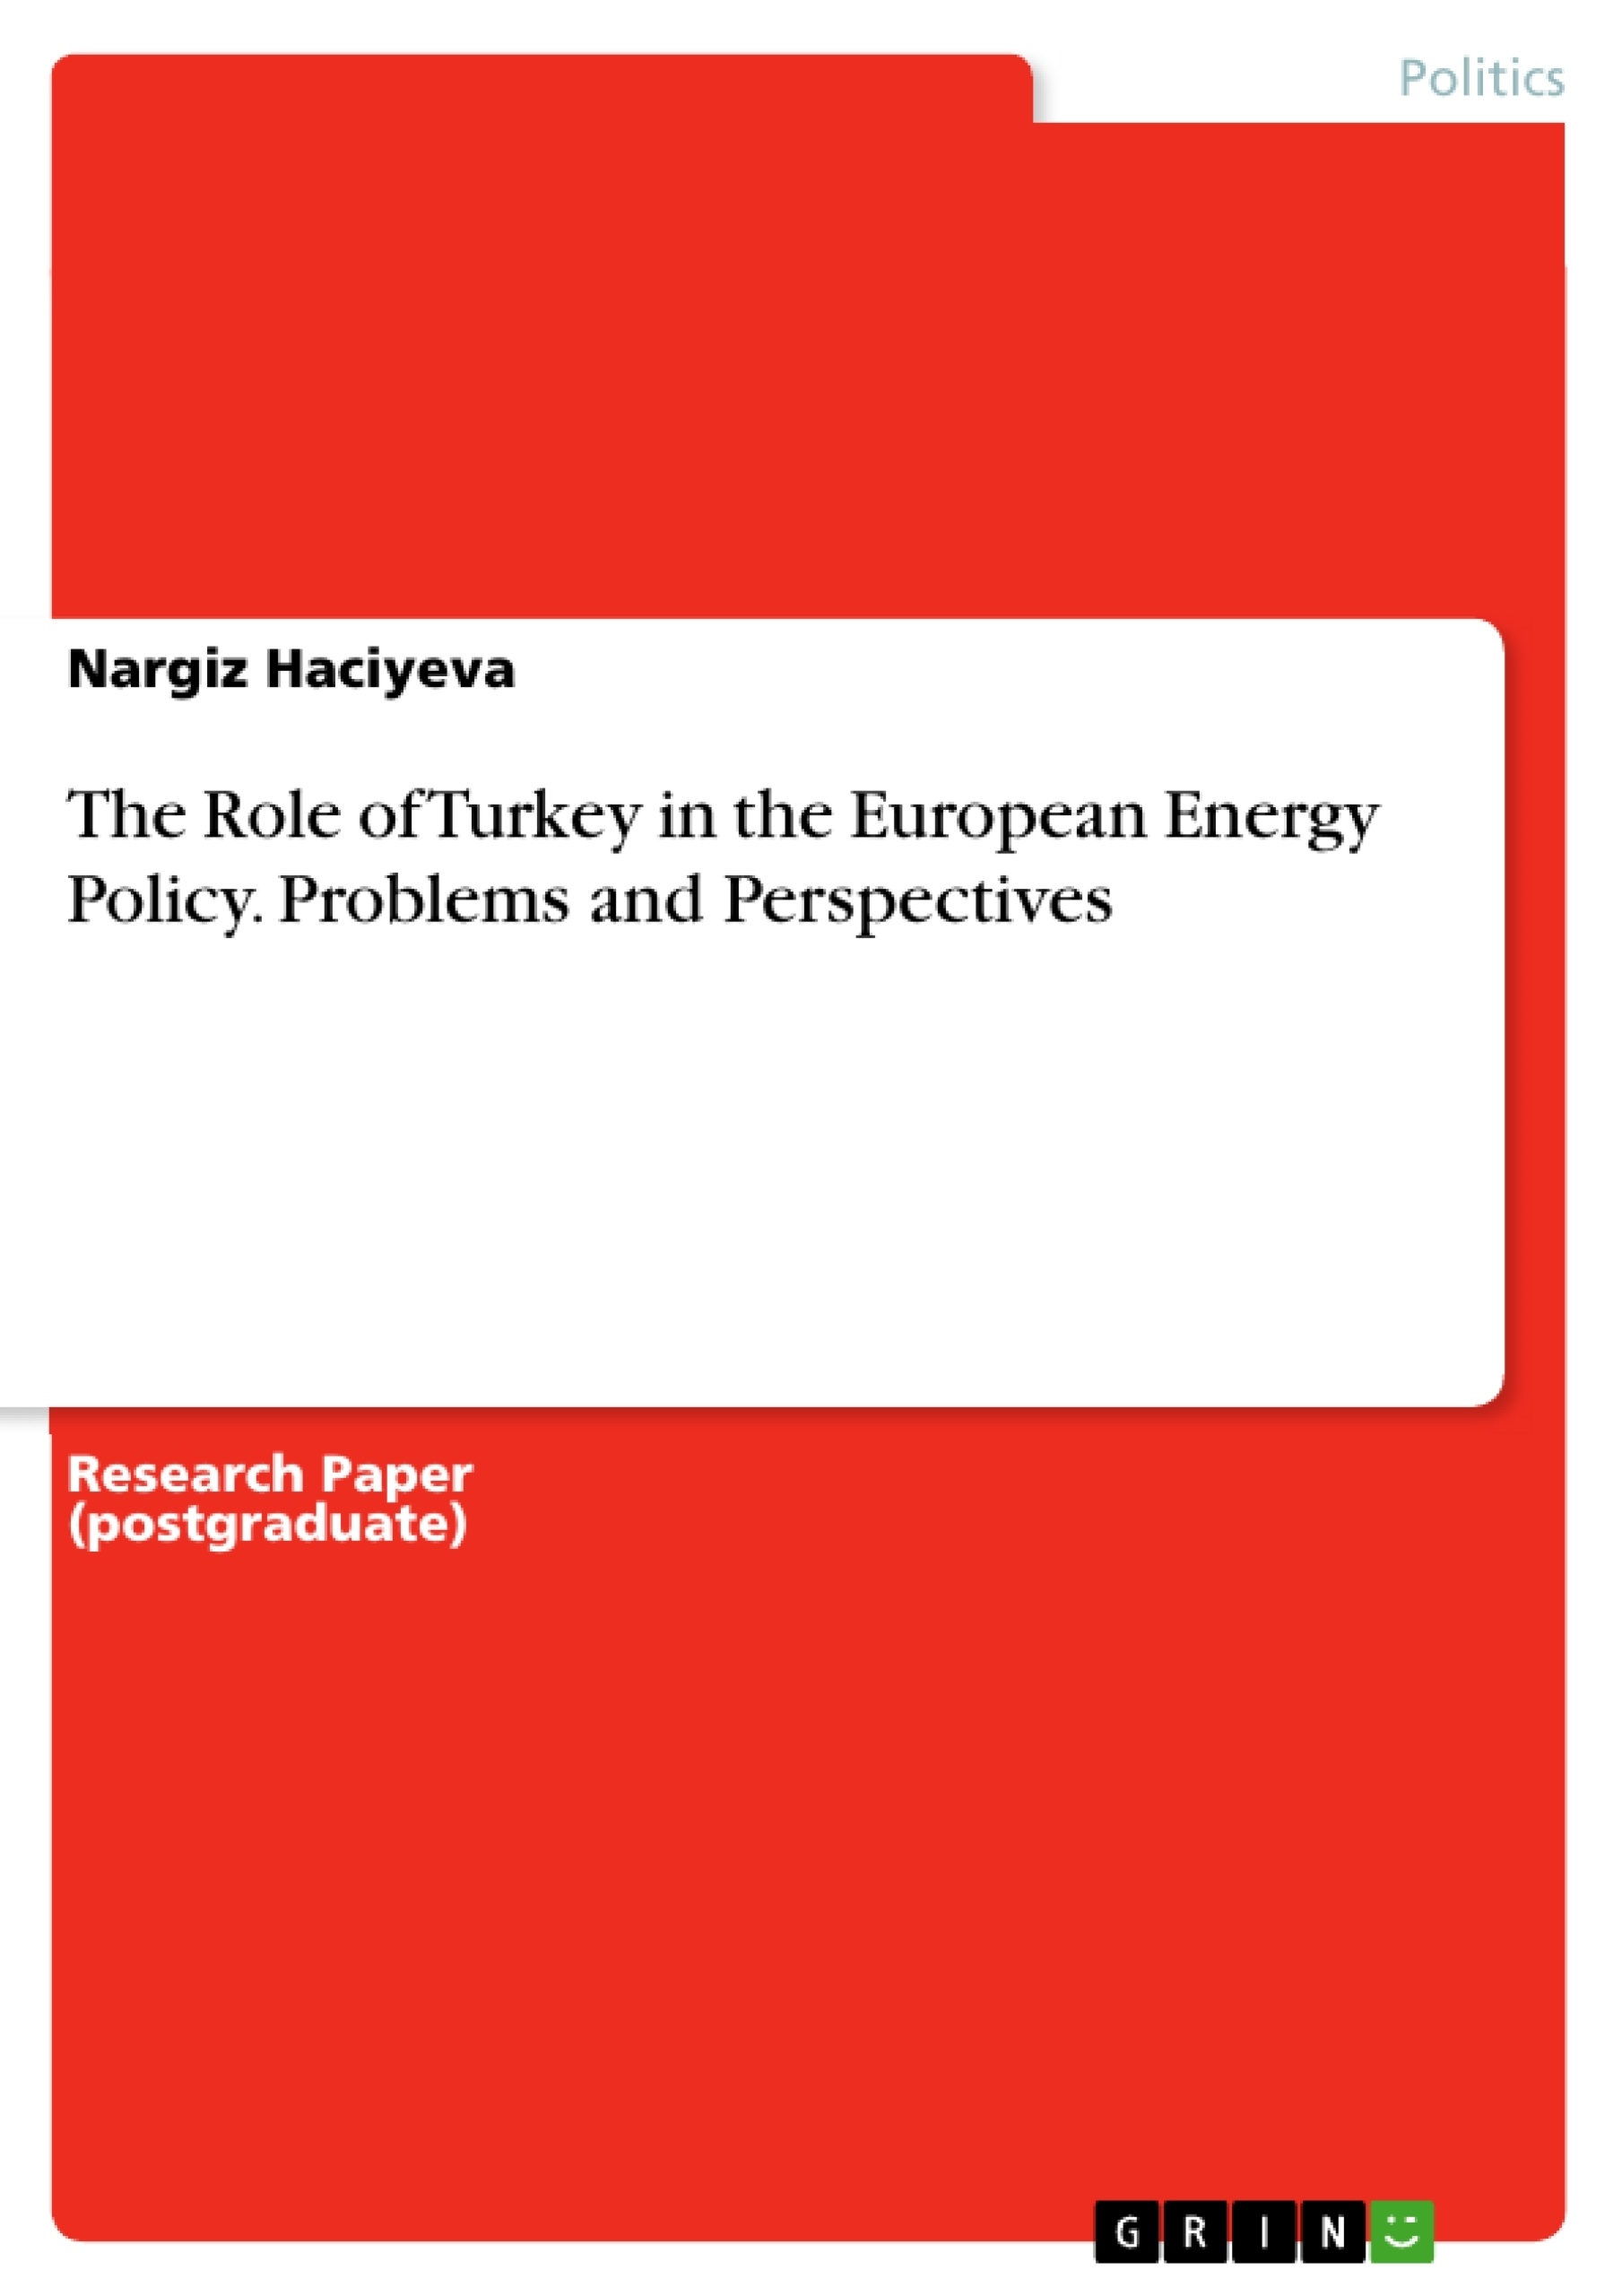 Titre: The Role of Turkey in the European Energy Policy. Problems and Perspectives